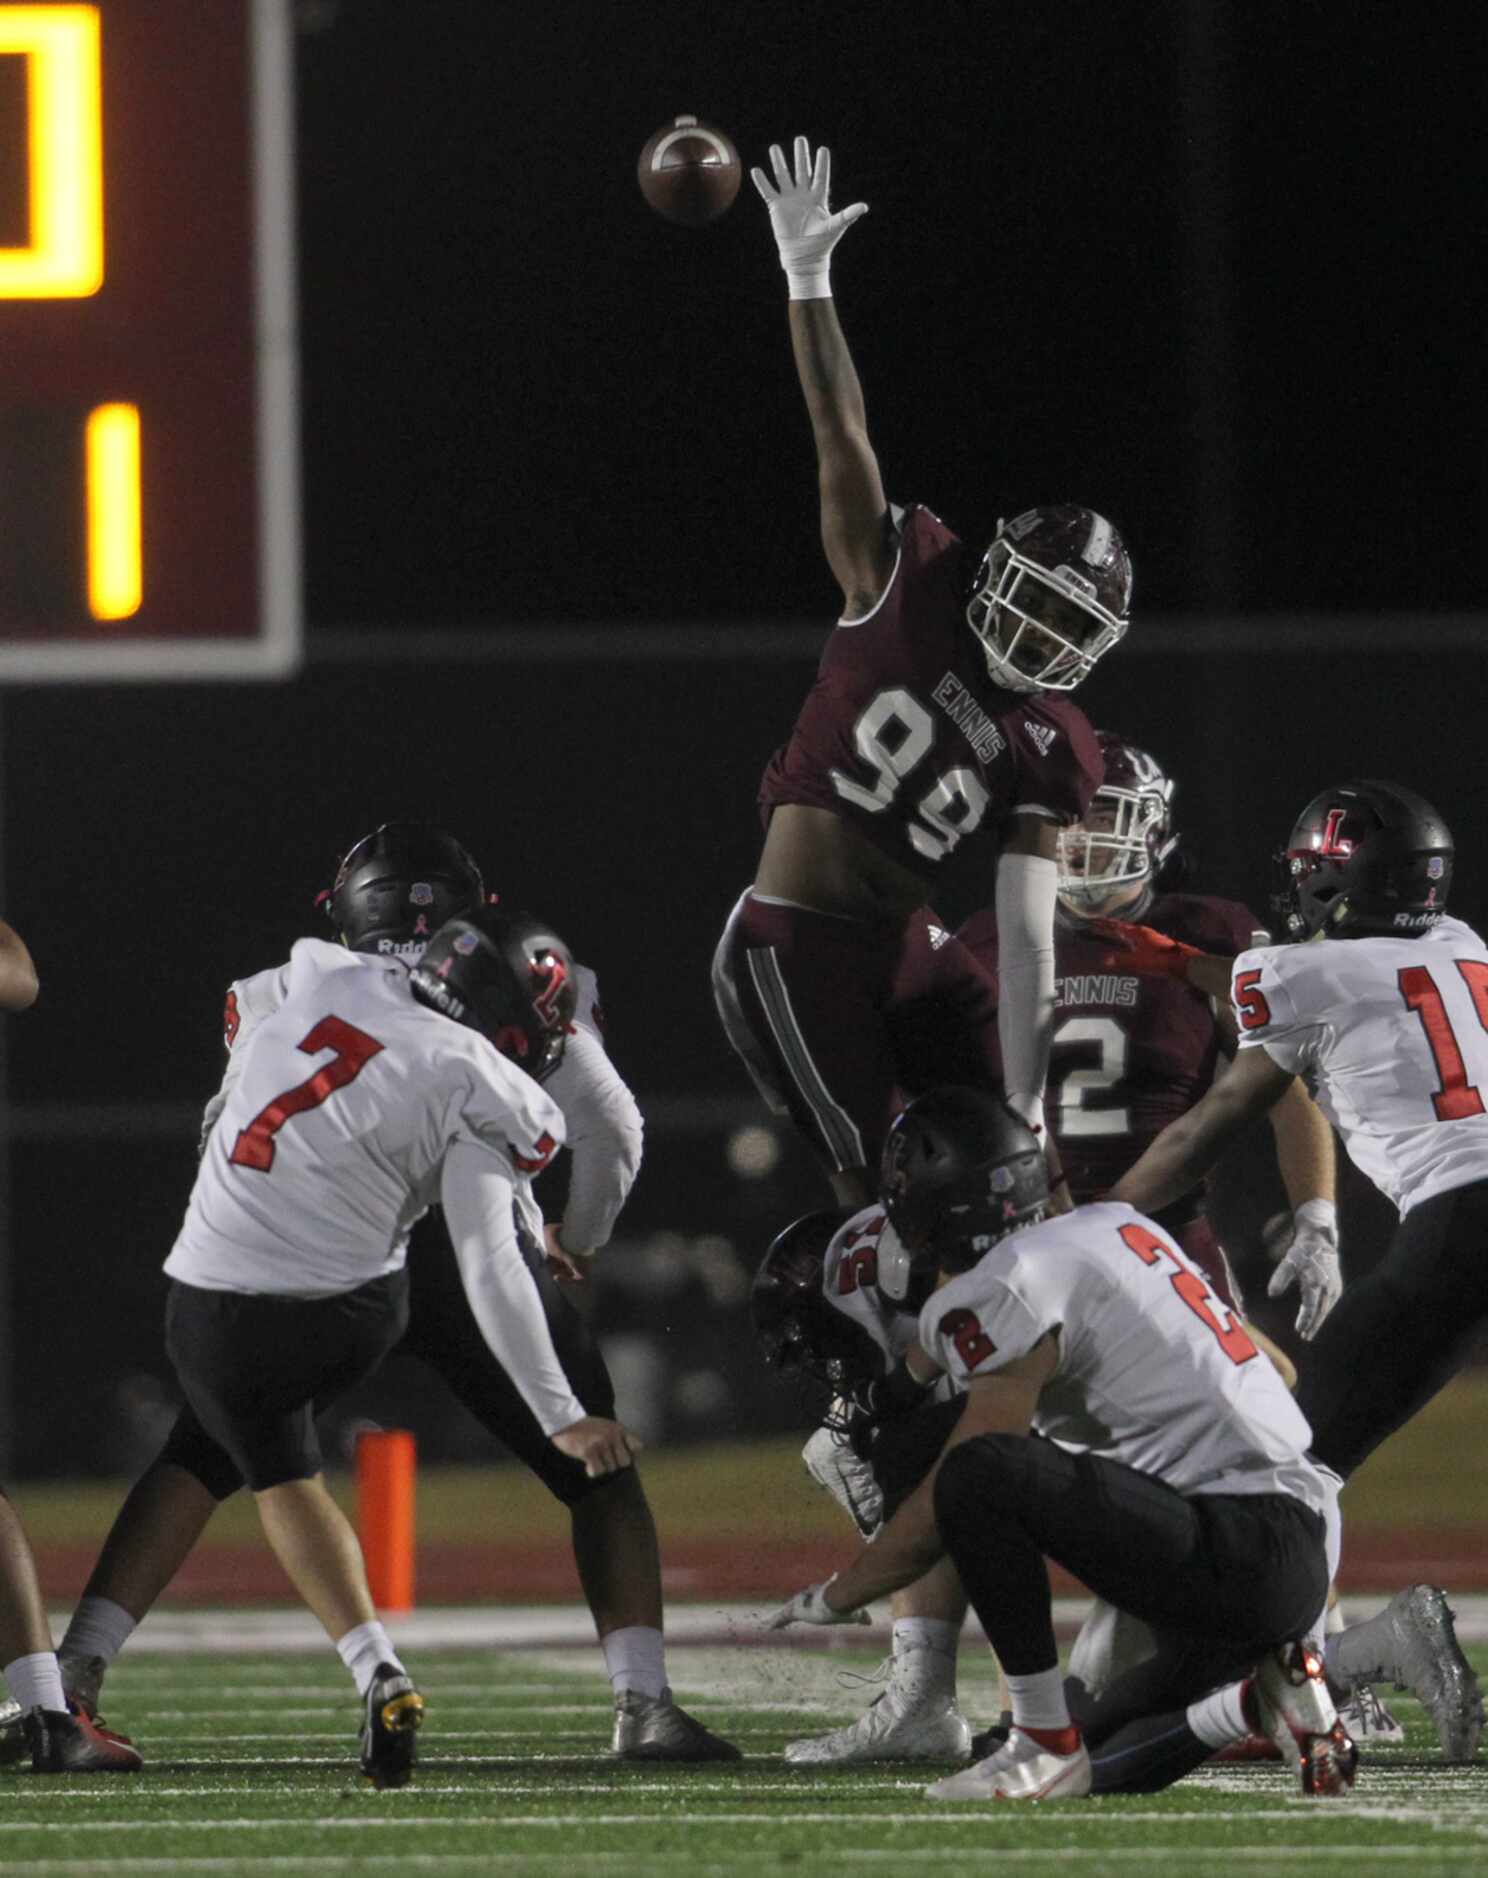 Ennis defensive lineman Deryous Stokes (99) leaps in an attempt to block a field goal...